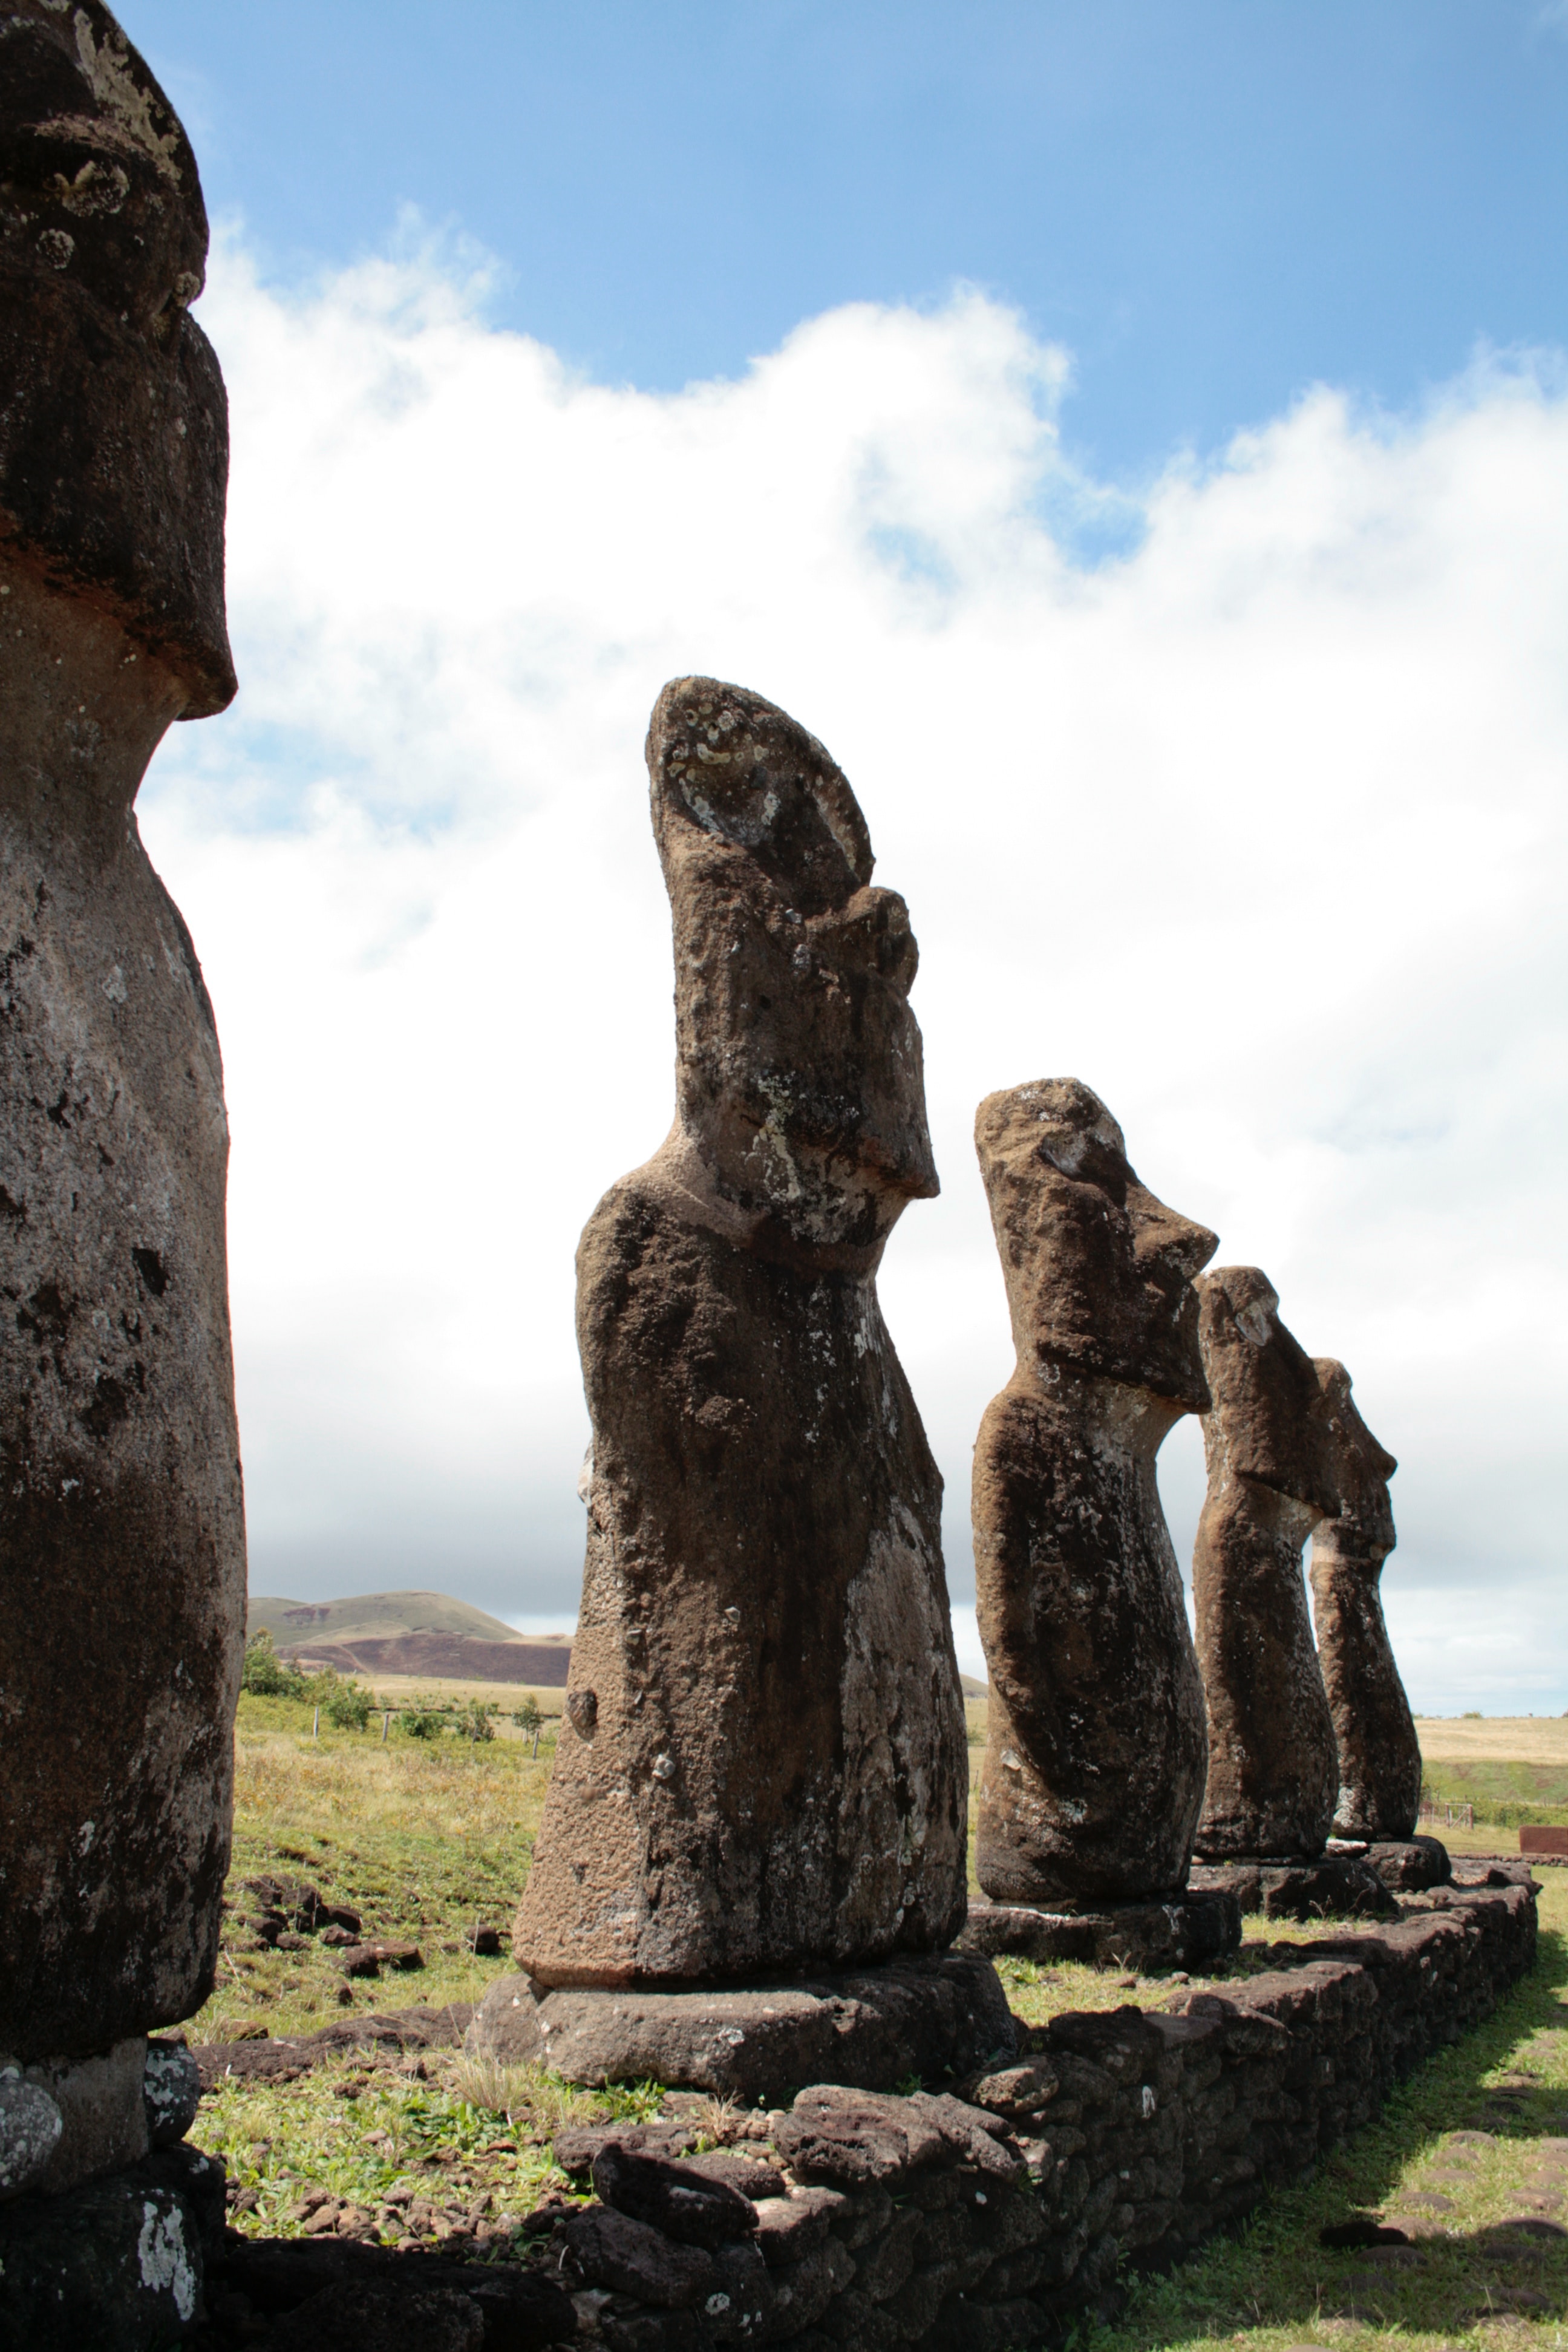 A row of statues on Easter Island. They are large limbless torsos with elongated heads.